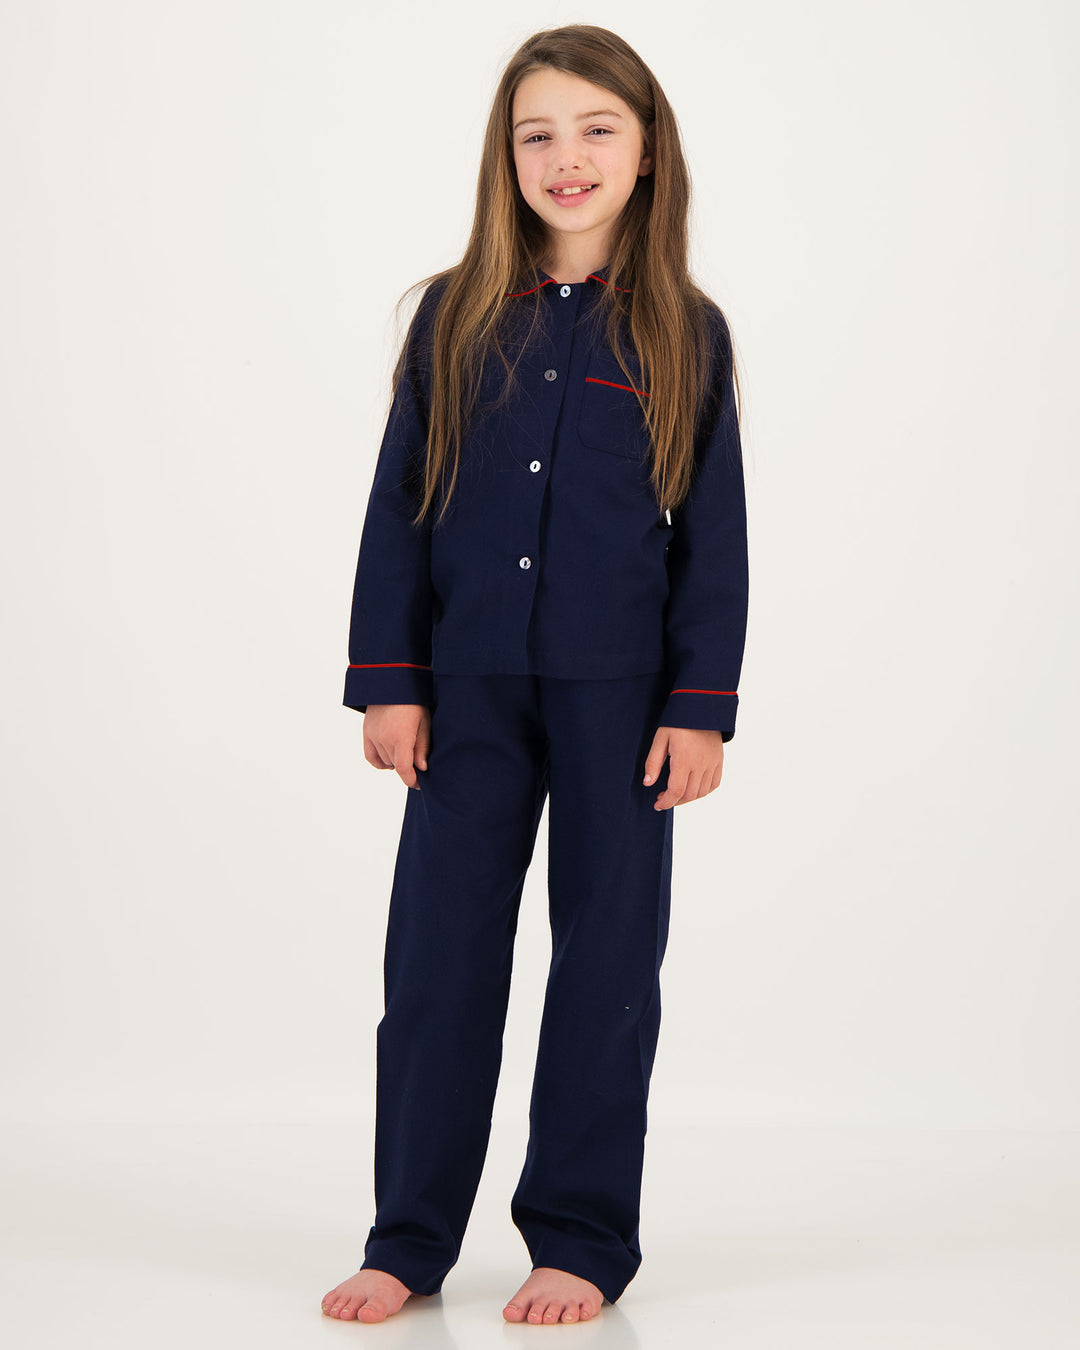 Girls Long Flannel Pyjamas Navy with Red Piping Front - Woodstock Laundry SA